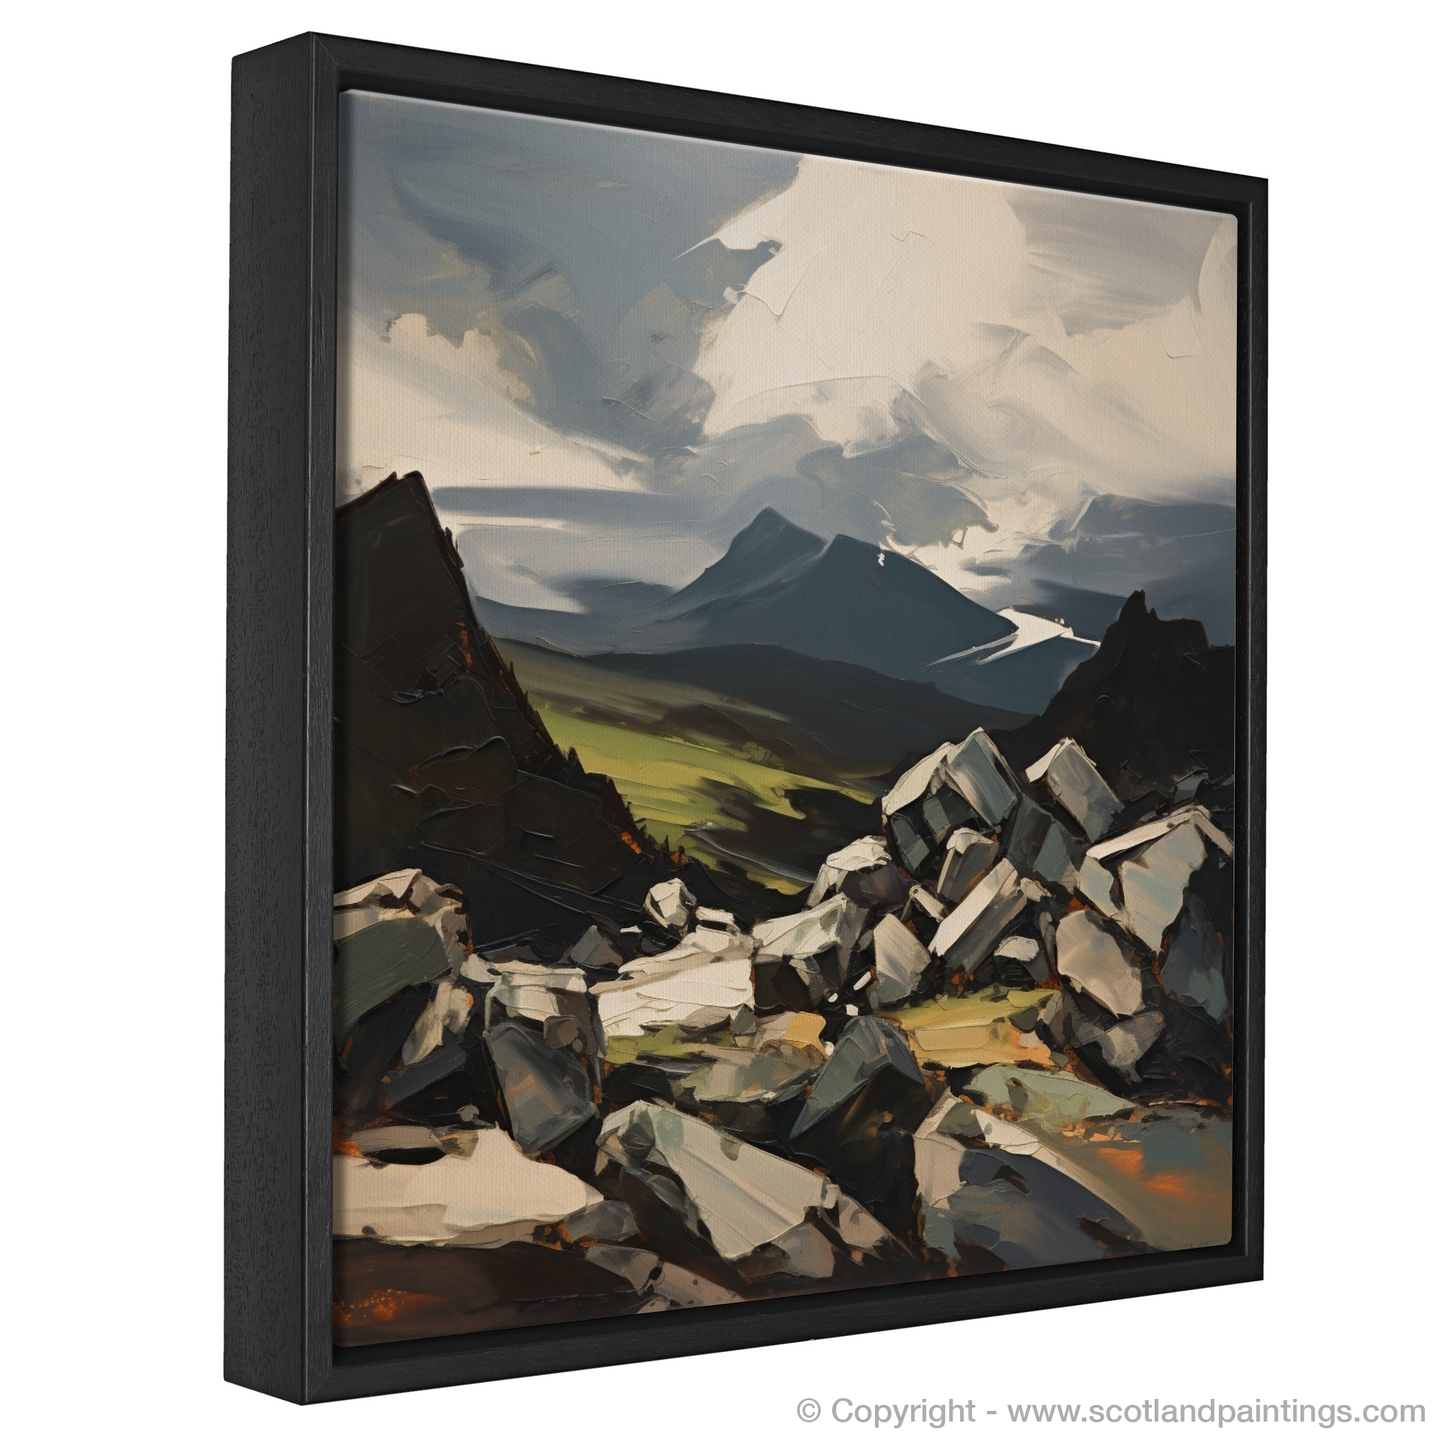 Painting and Art Print of Cairn Gorm entitled "Expressionist Ode to Cairn Gorm".